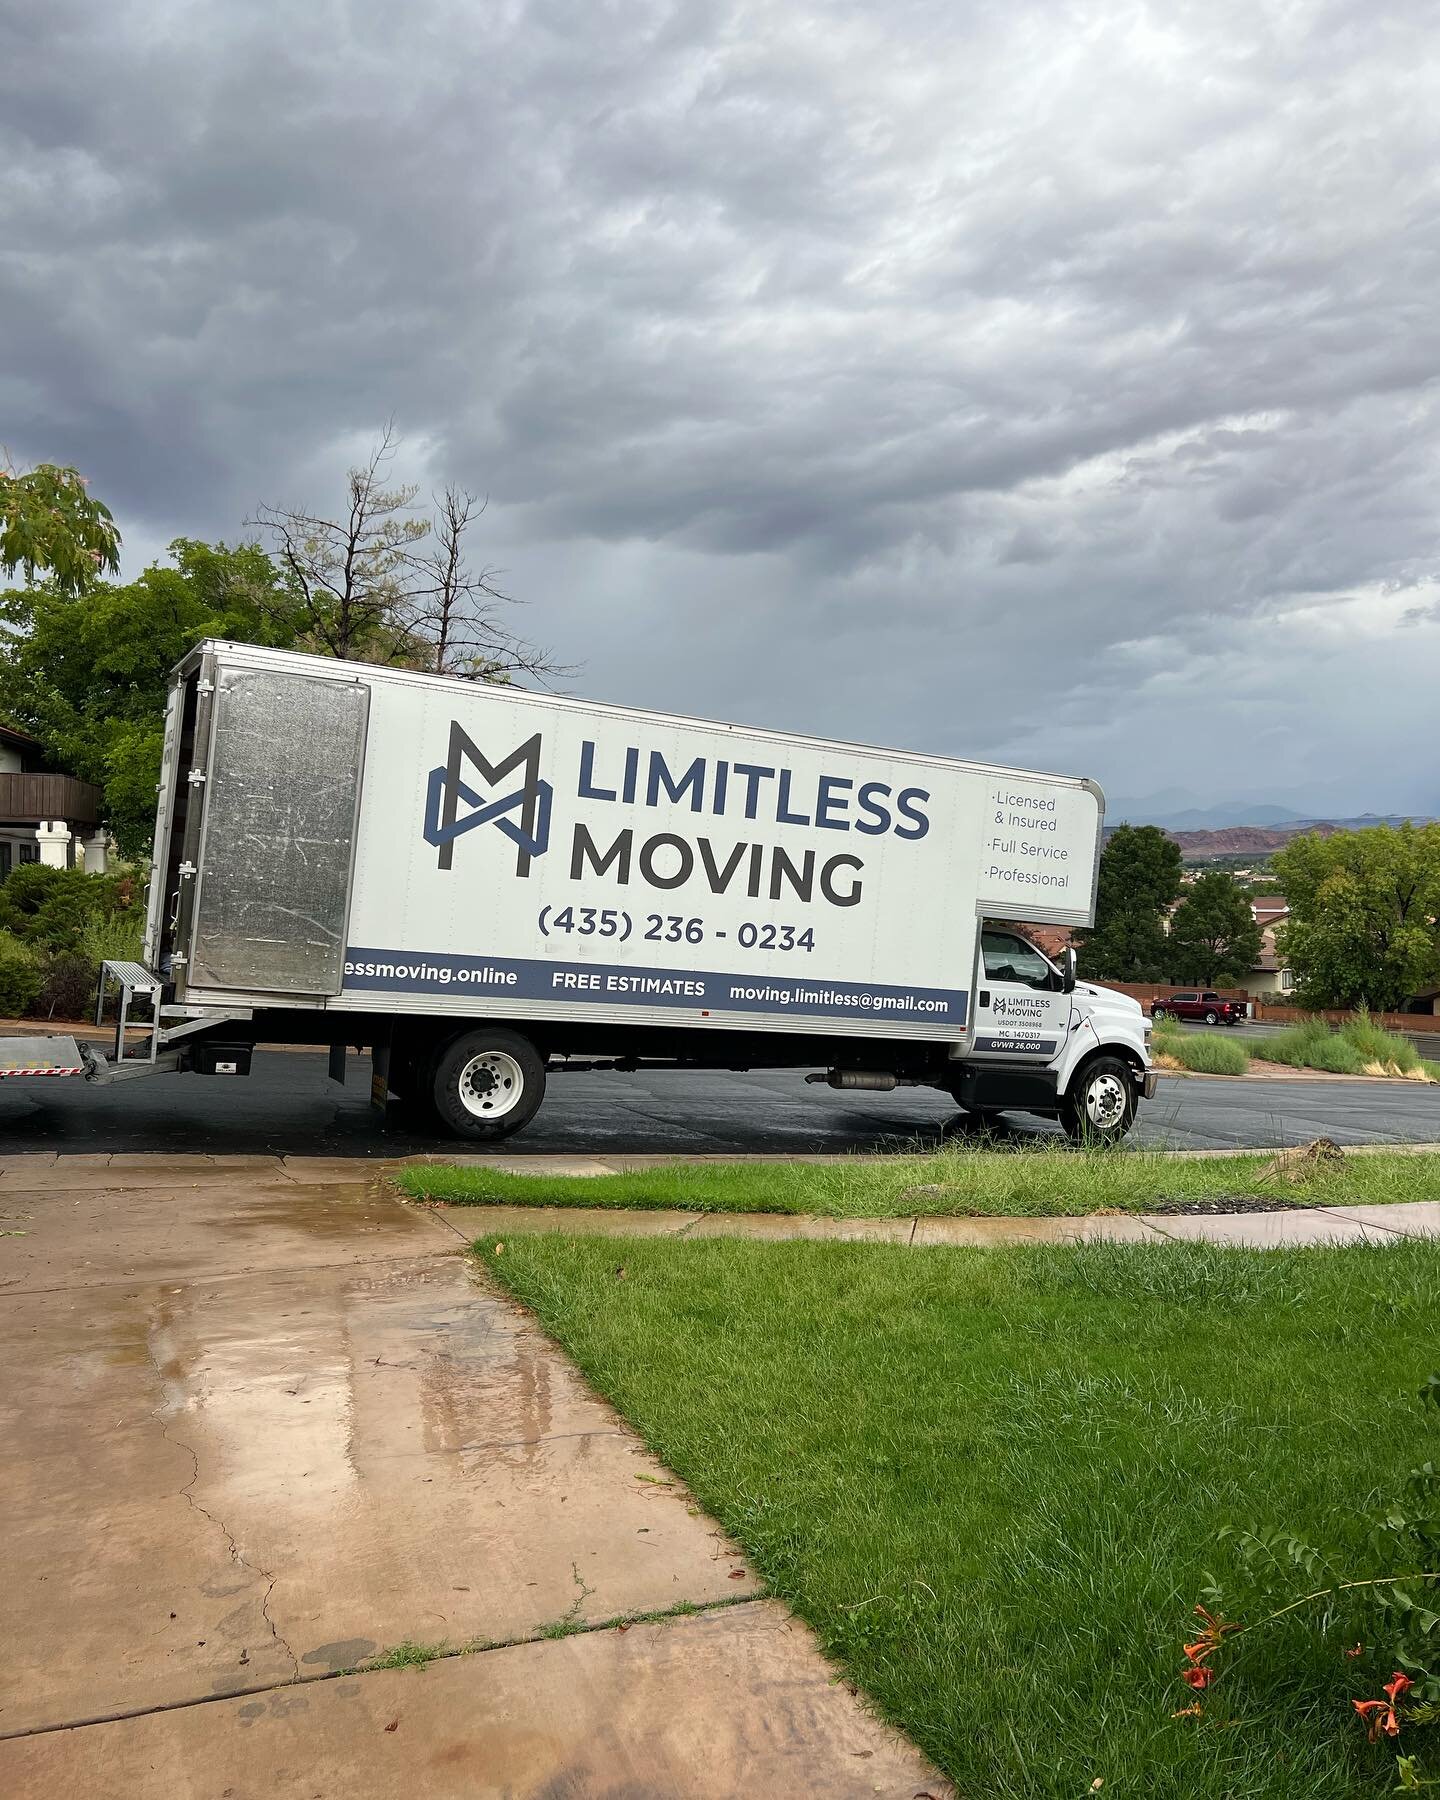 We have enjoyed moving our customers in the rain after a long, hot Summer! Let us know how we can help you as we head into this upcoming season.